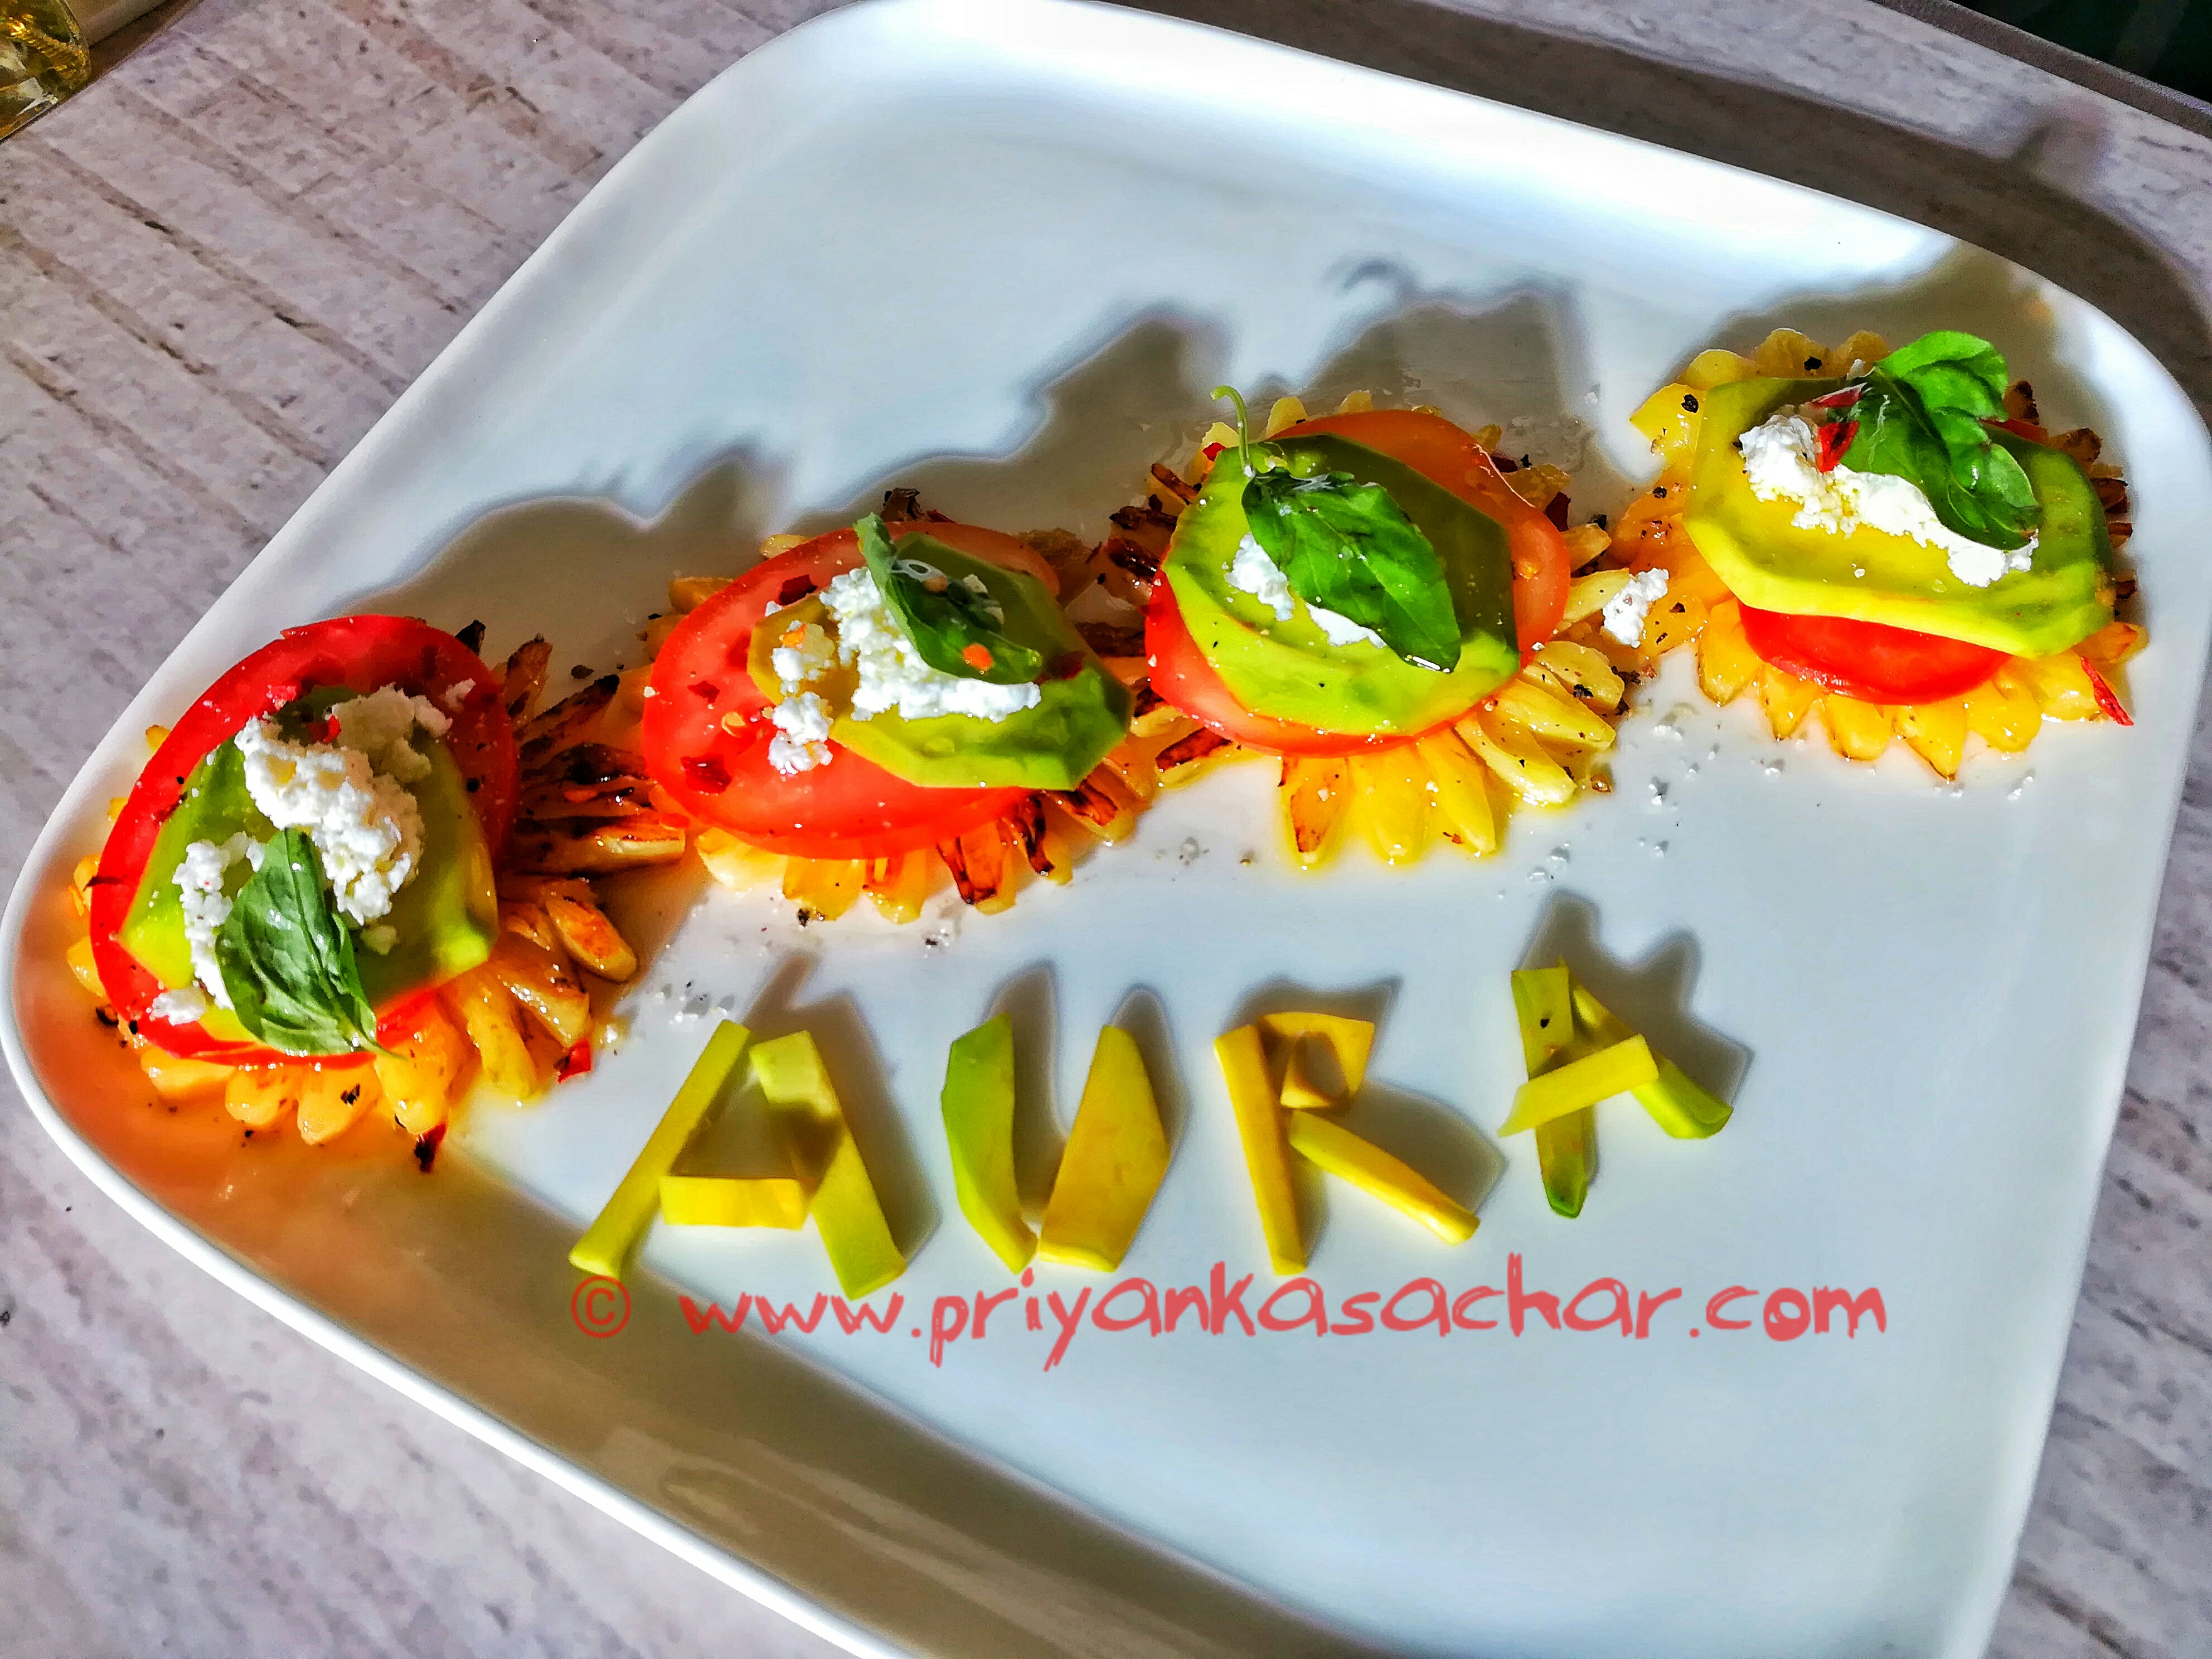 Caramelised Pineapple, Tomato, Avocado & Ricotta Salad for the cookoff